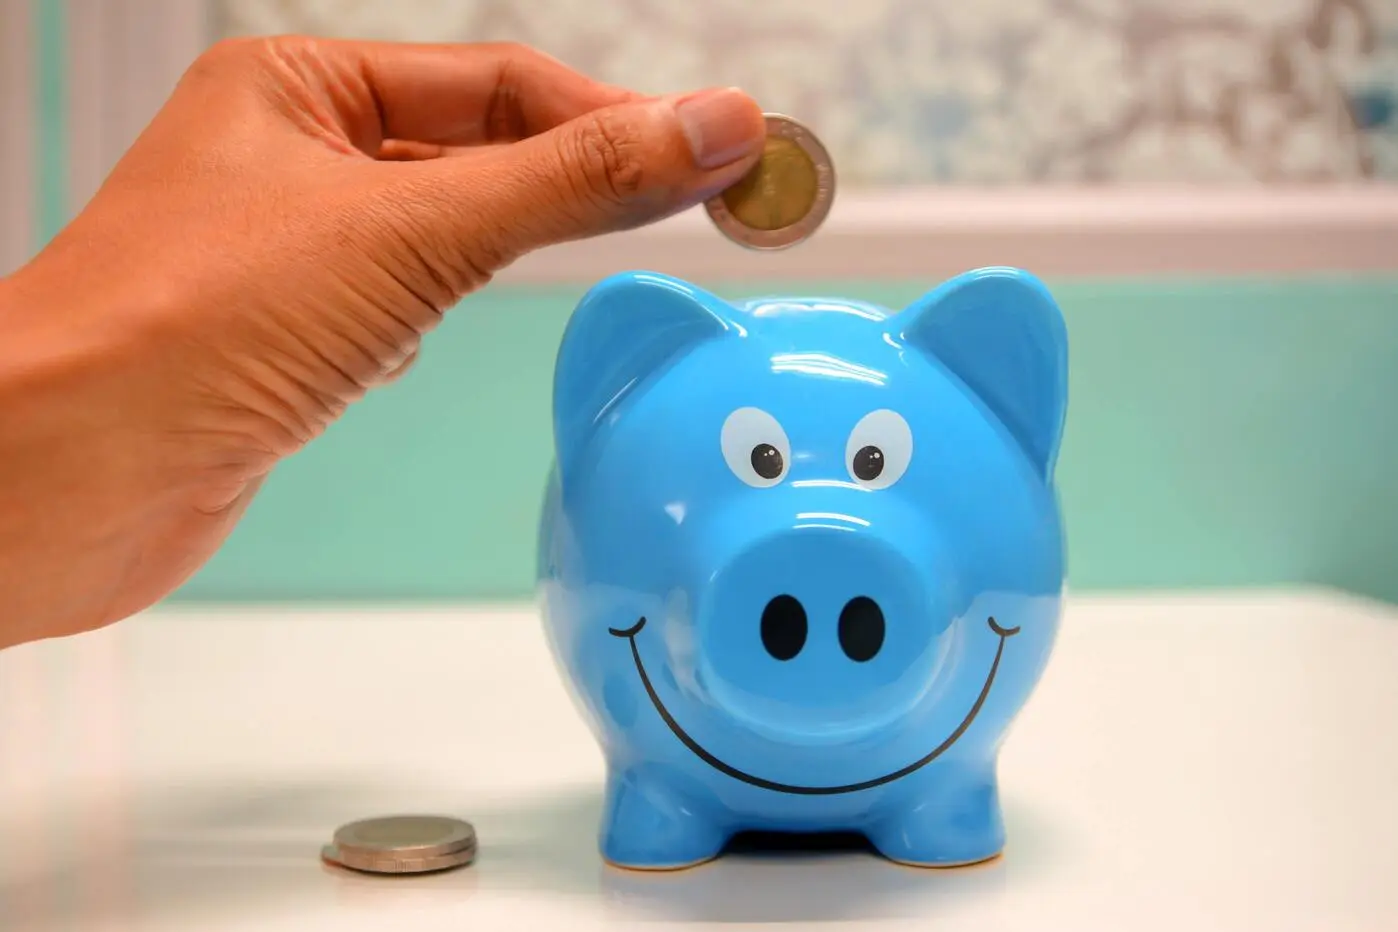 Hand inserting coin into piggy bank.